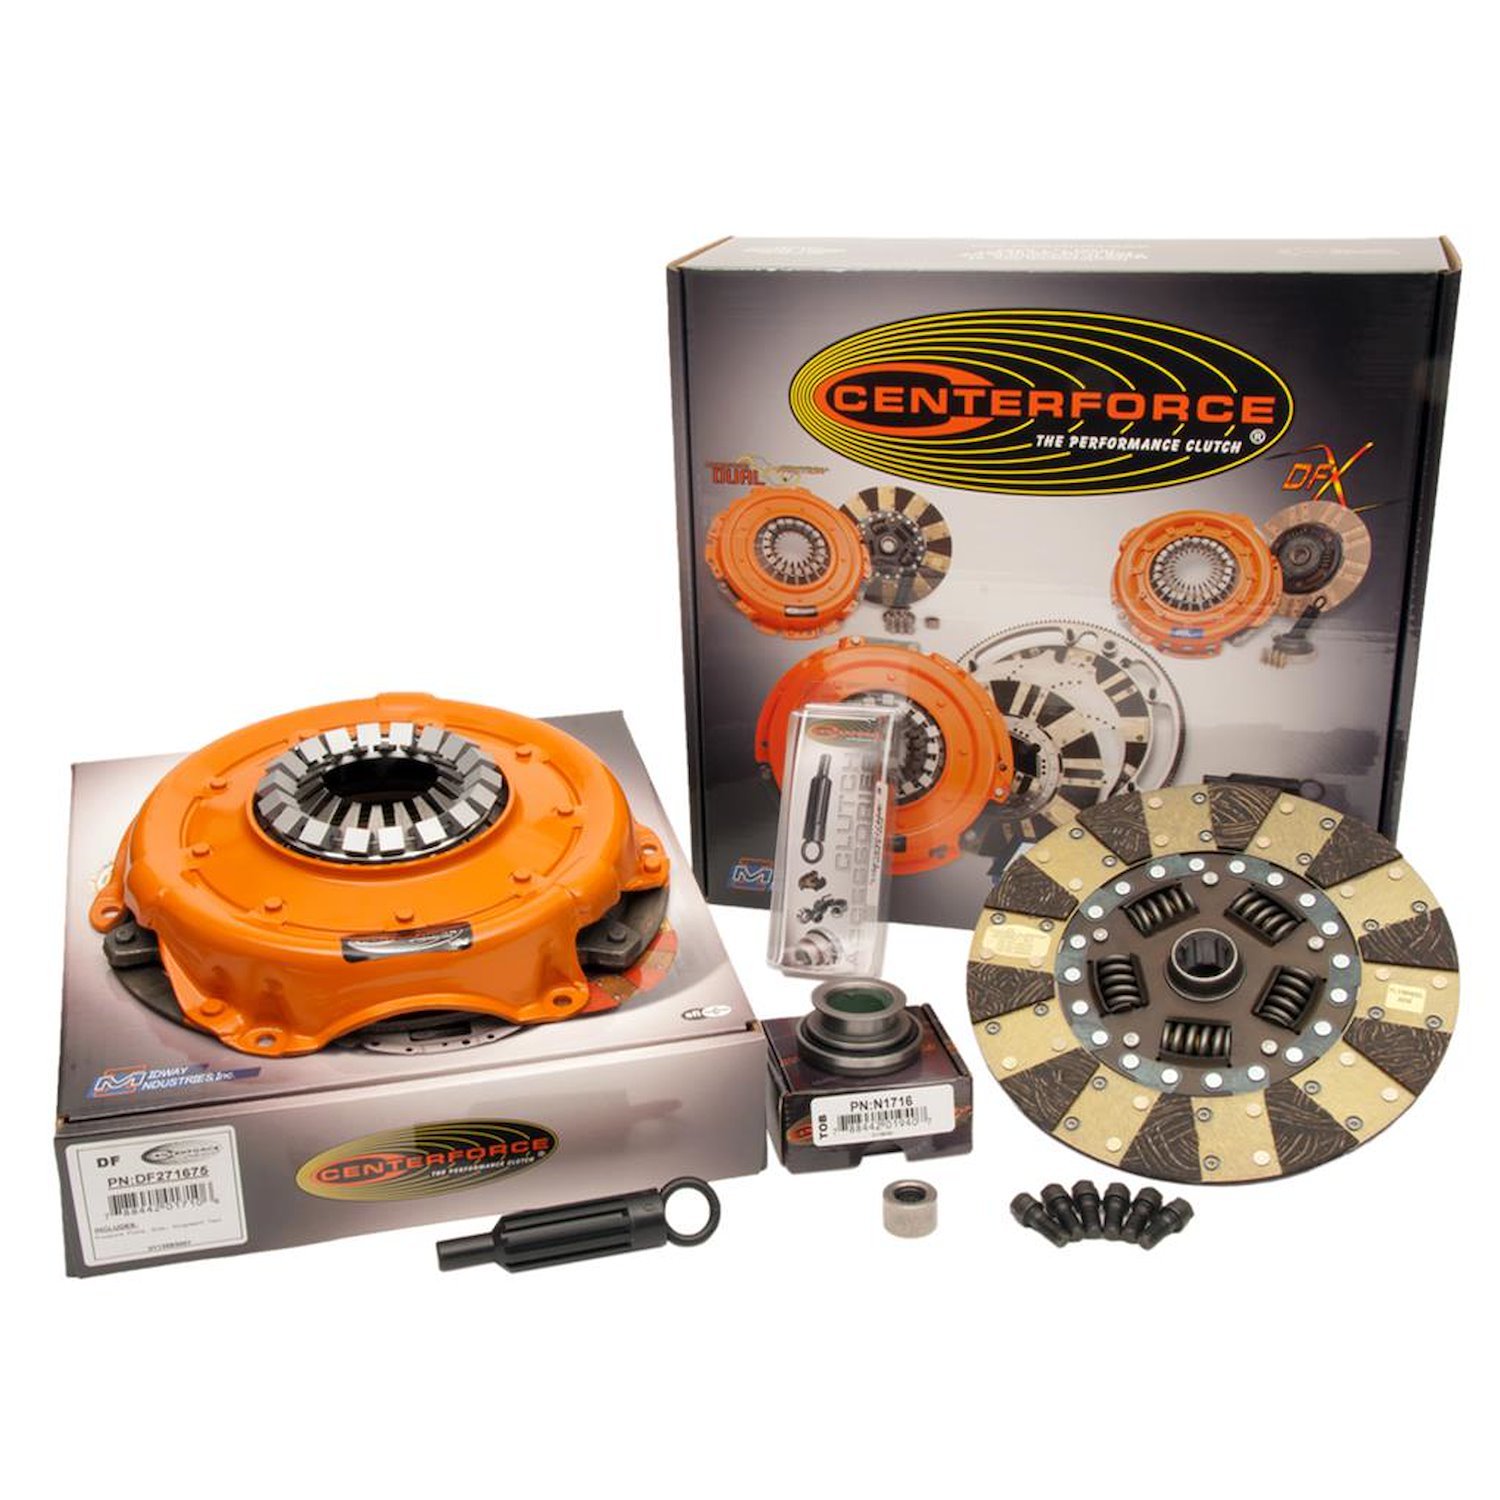 Dual Friction Clutch Kit Includes Pressure Plate, Disc, Alignment Tool, Throw Out Bearing, Pilot Bearing, Pressure Plate Bo